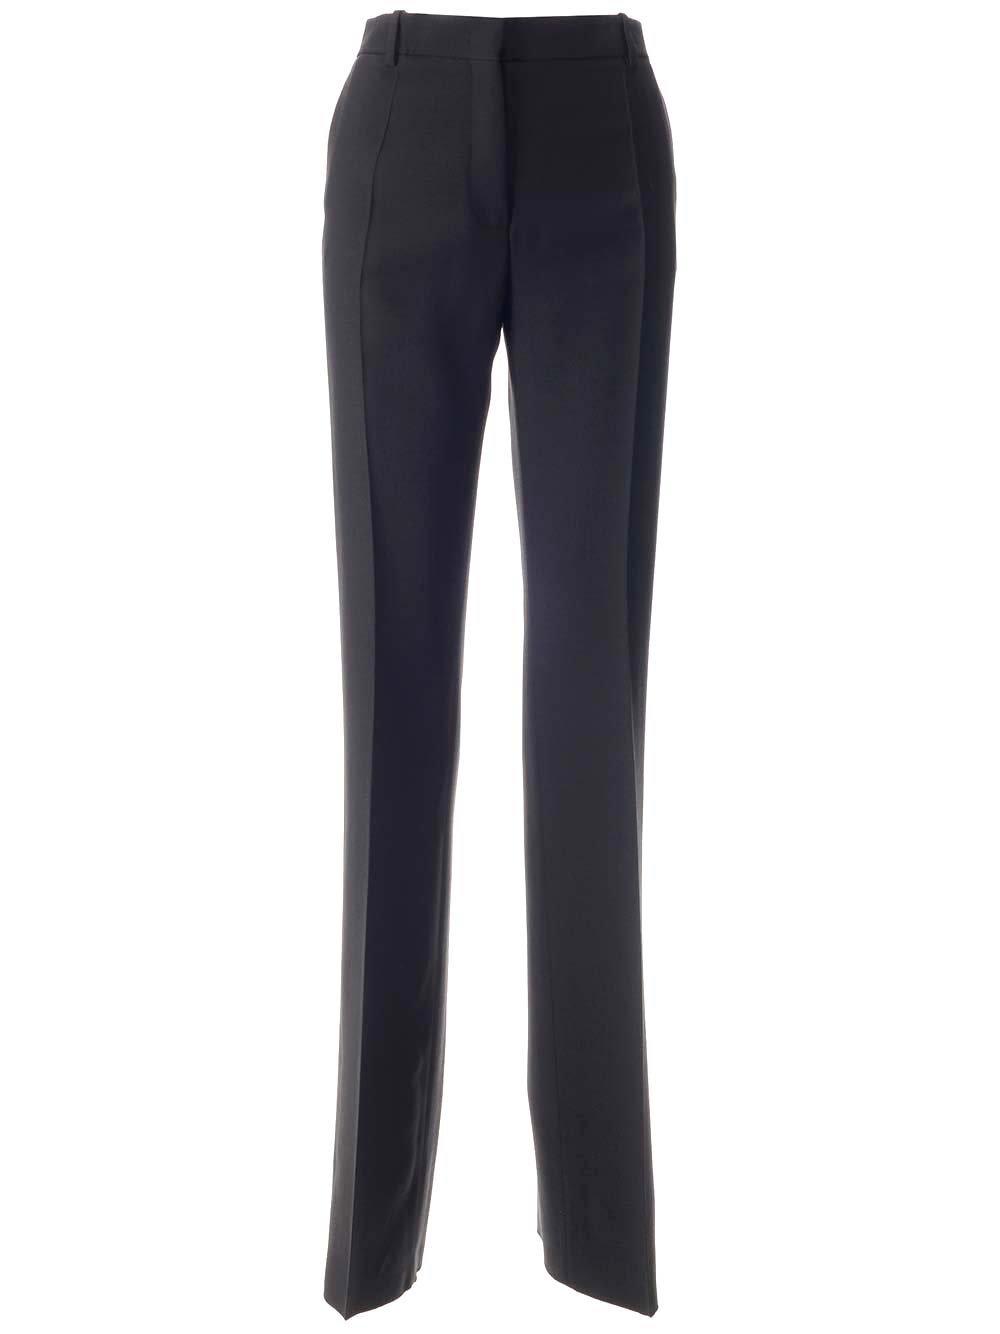 Valentino Buttoned Tailored Pants